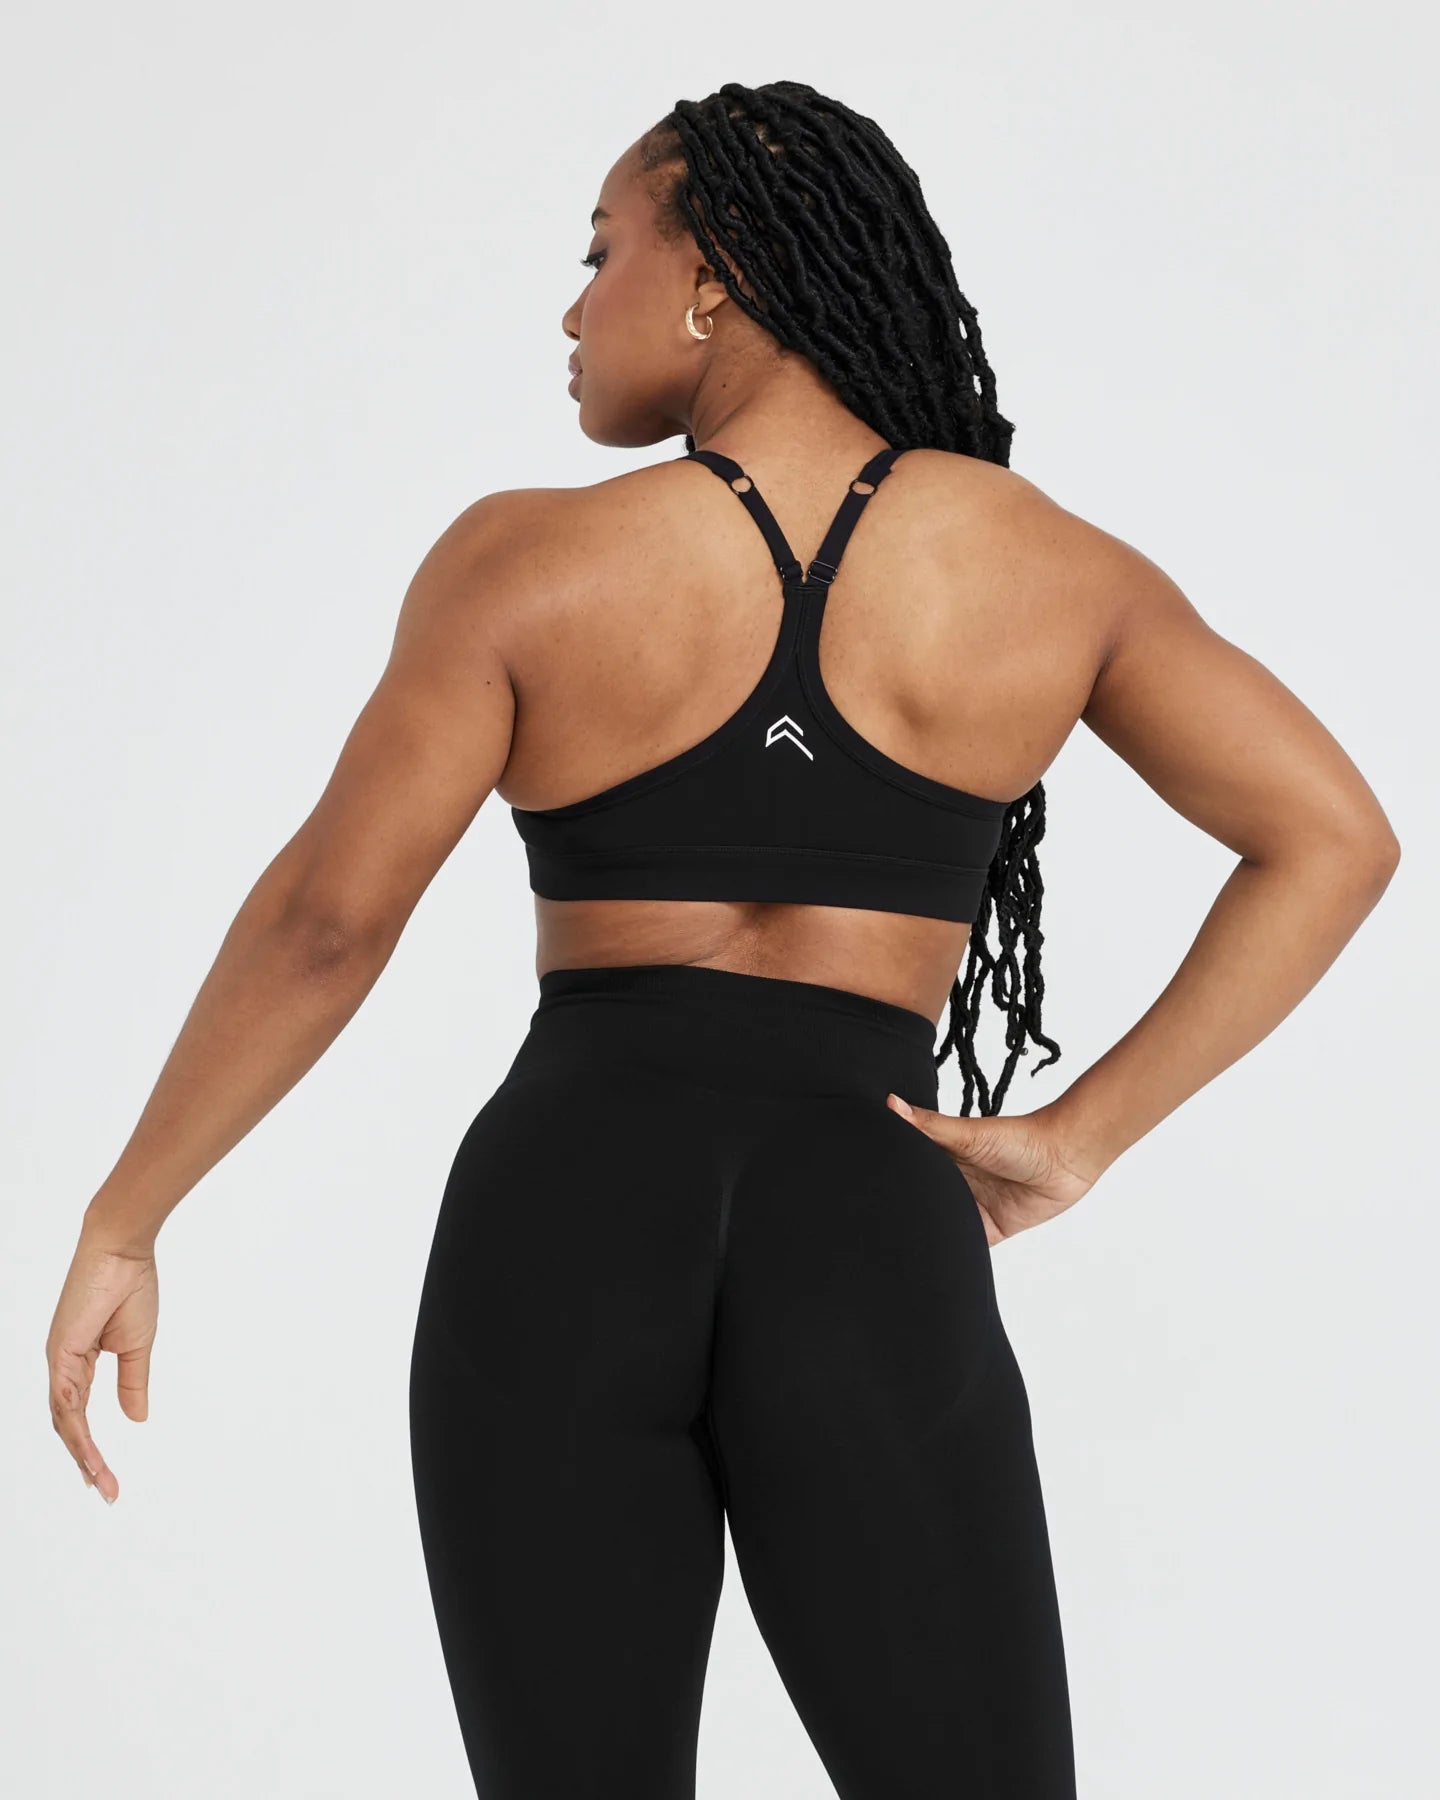 French Affair Active Sports Bras